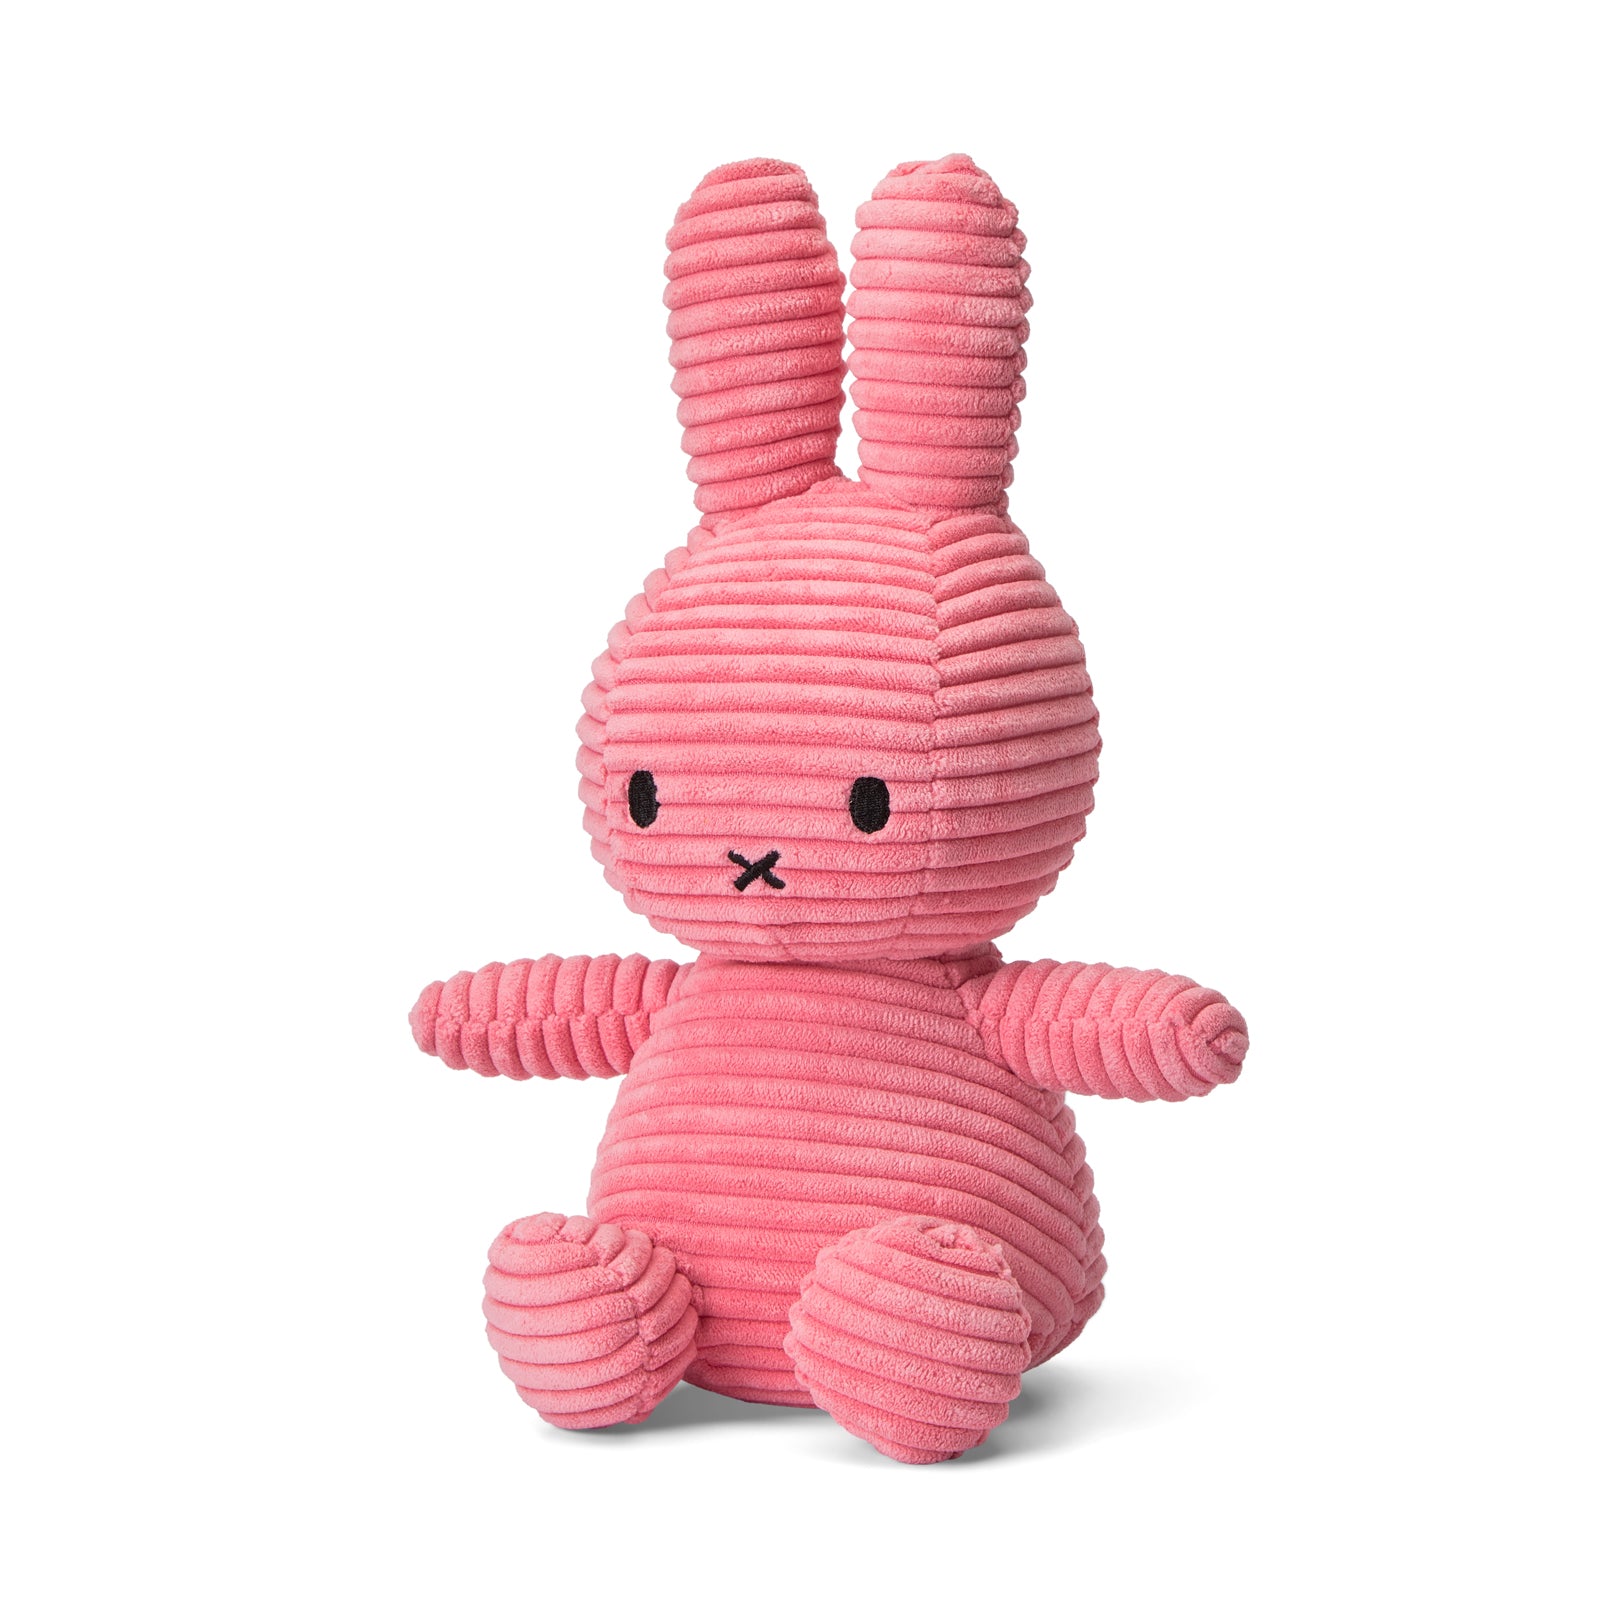 Front quarter view of Miffy the pink rabbit